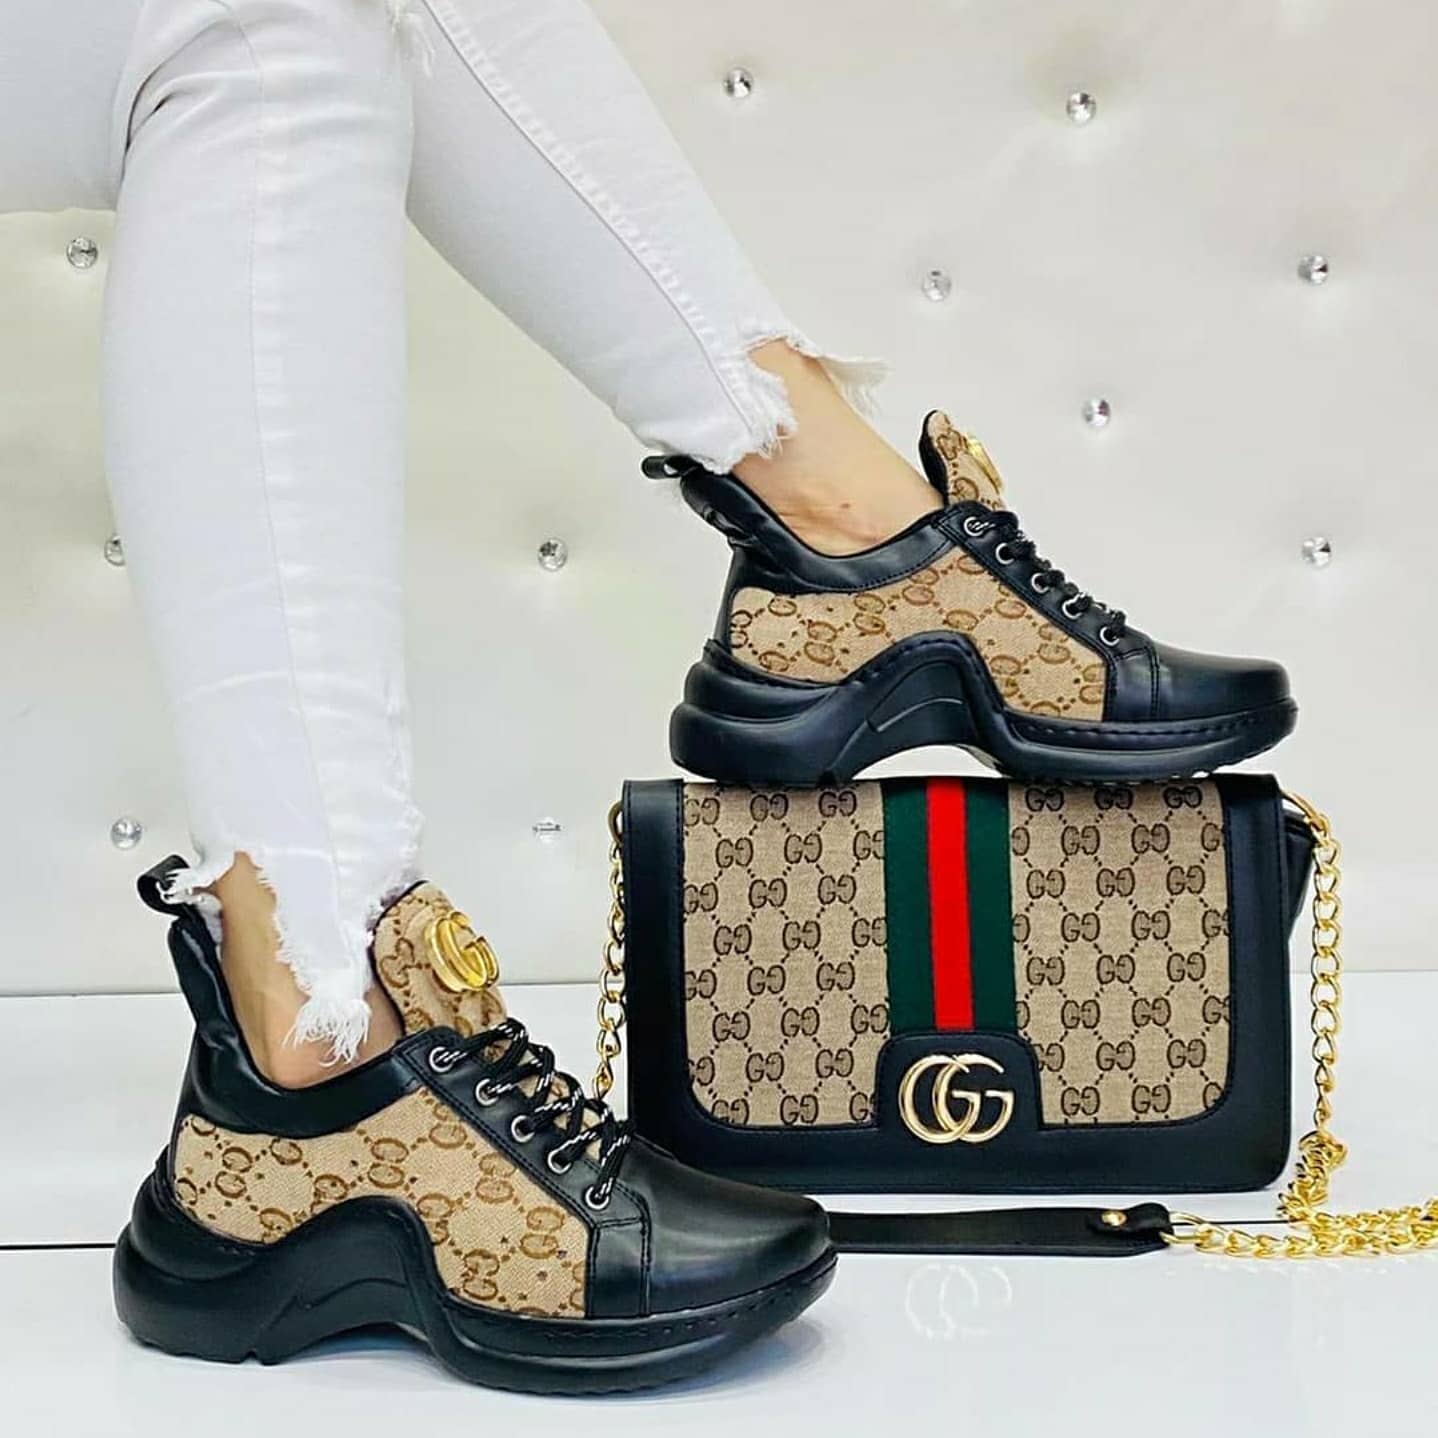 Gucci women shoes collection 2021